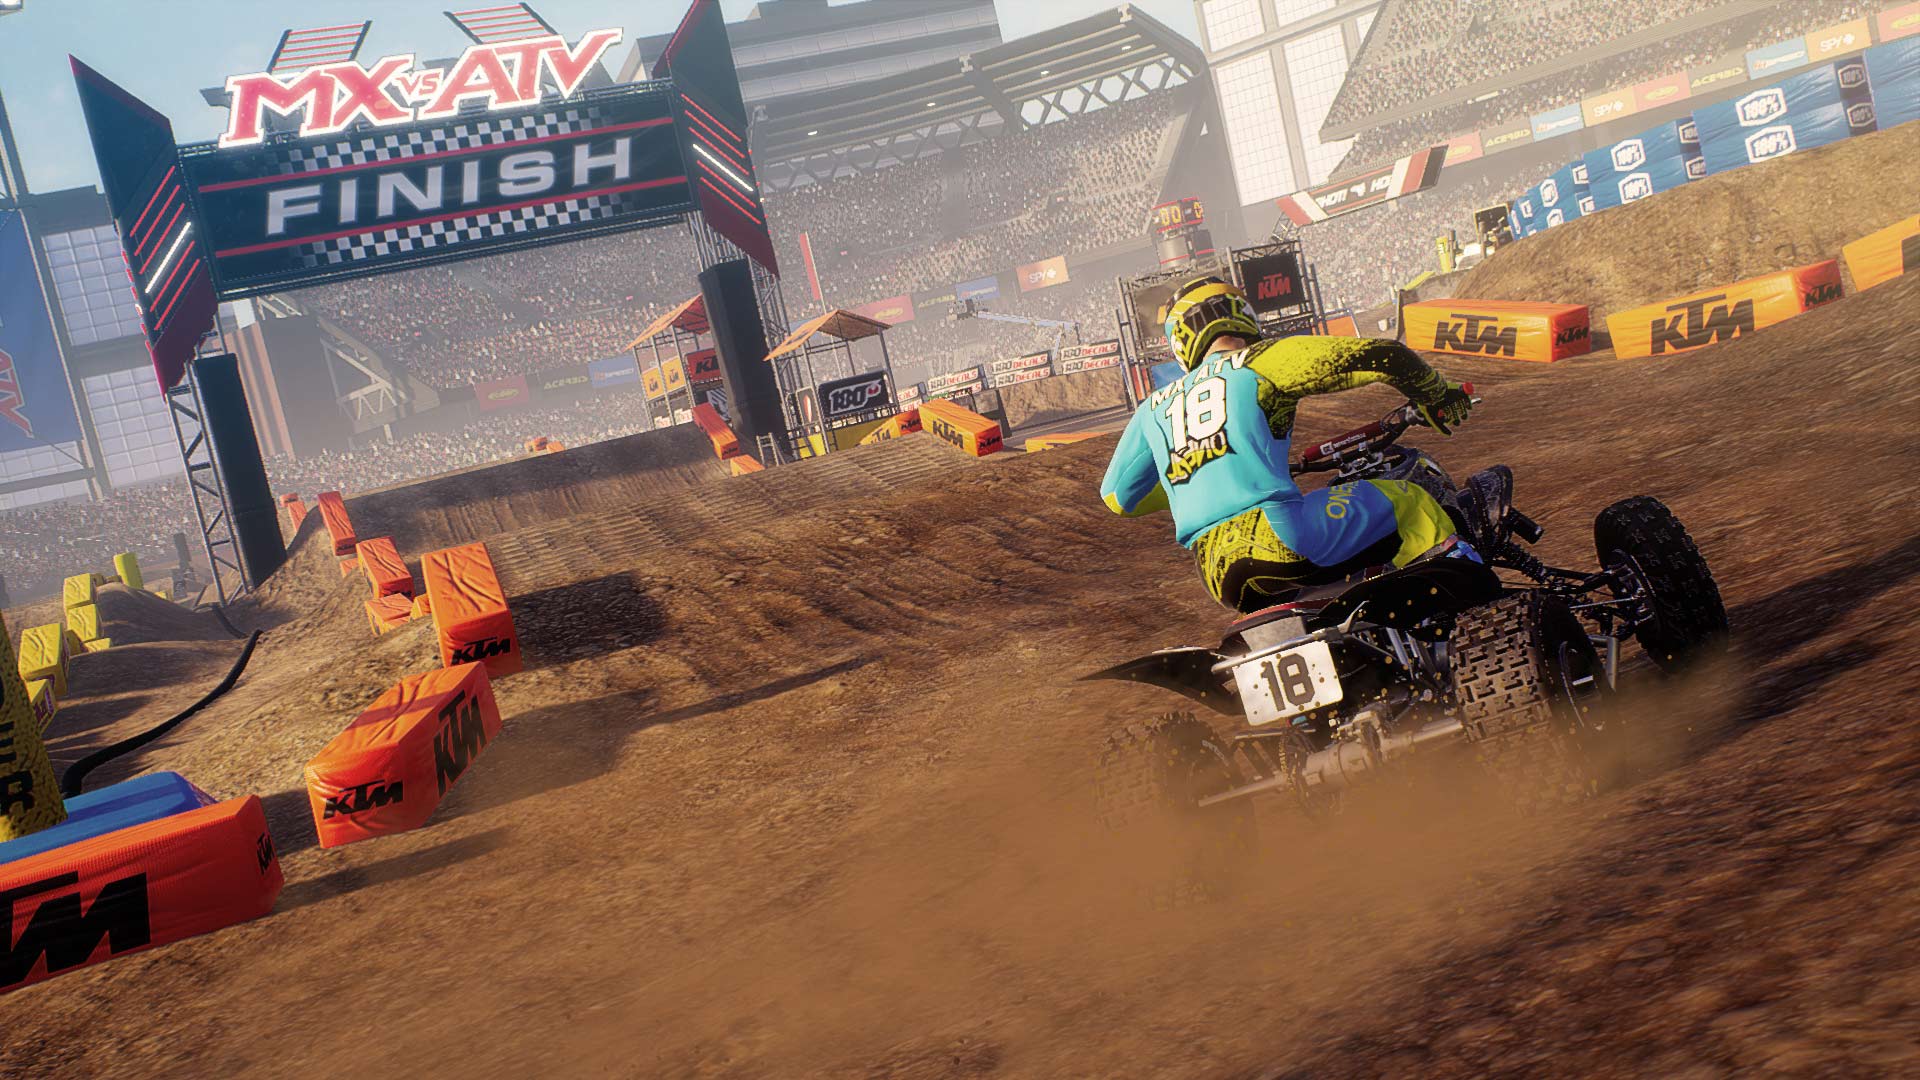 atv games for ps4